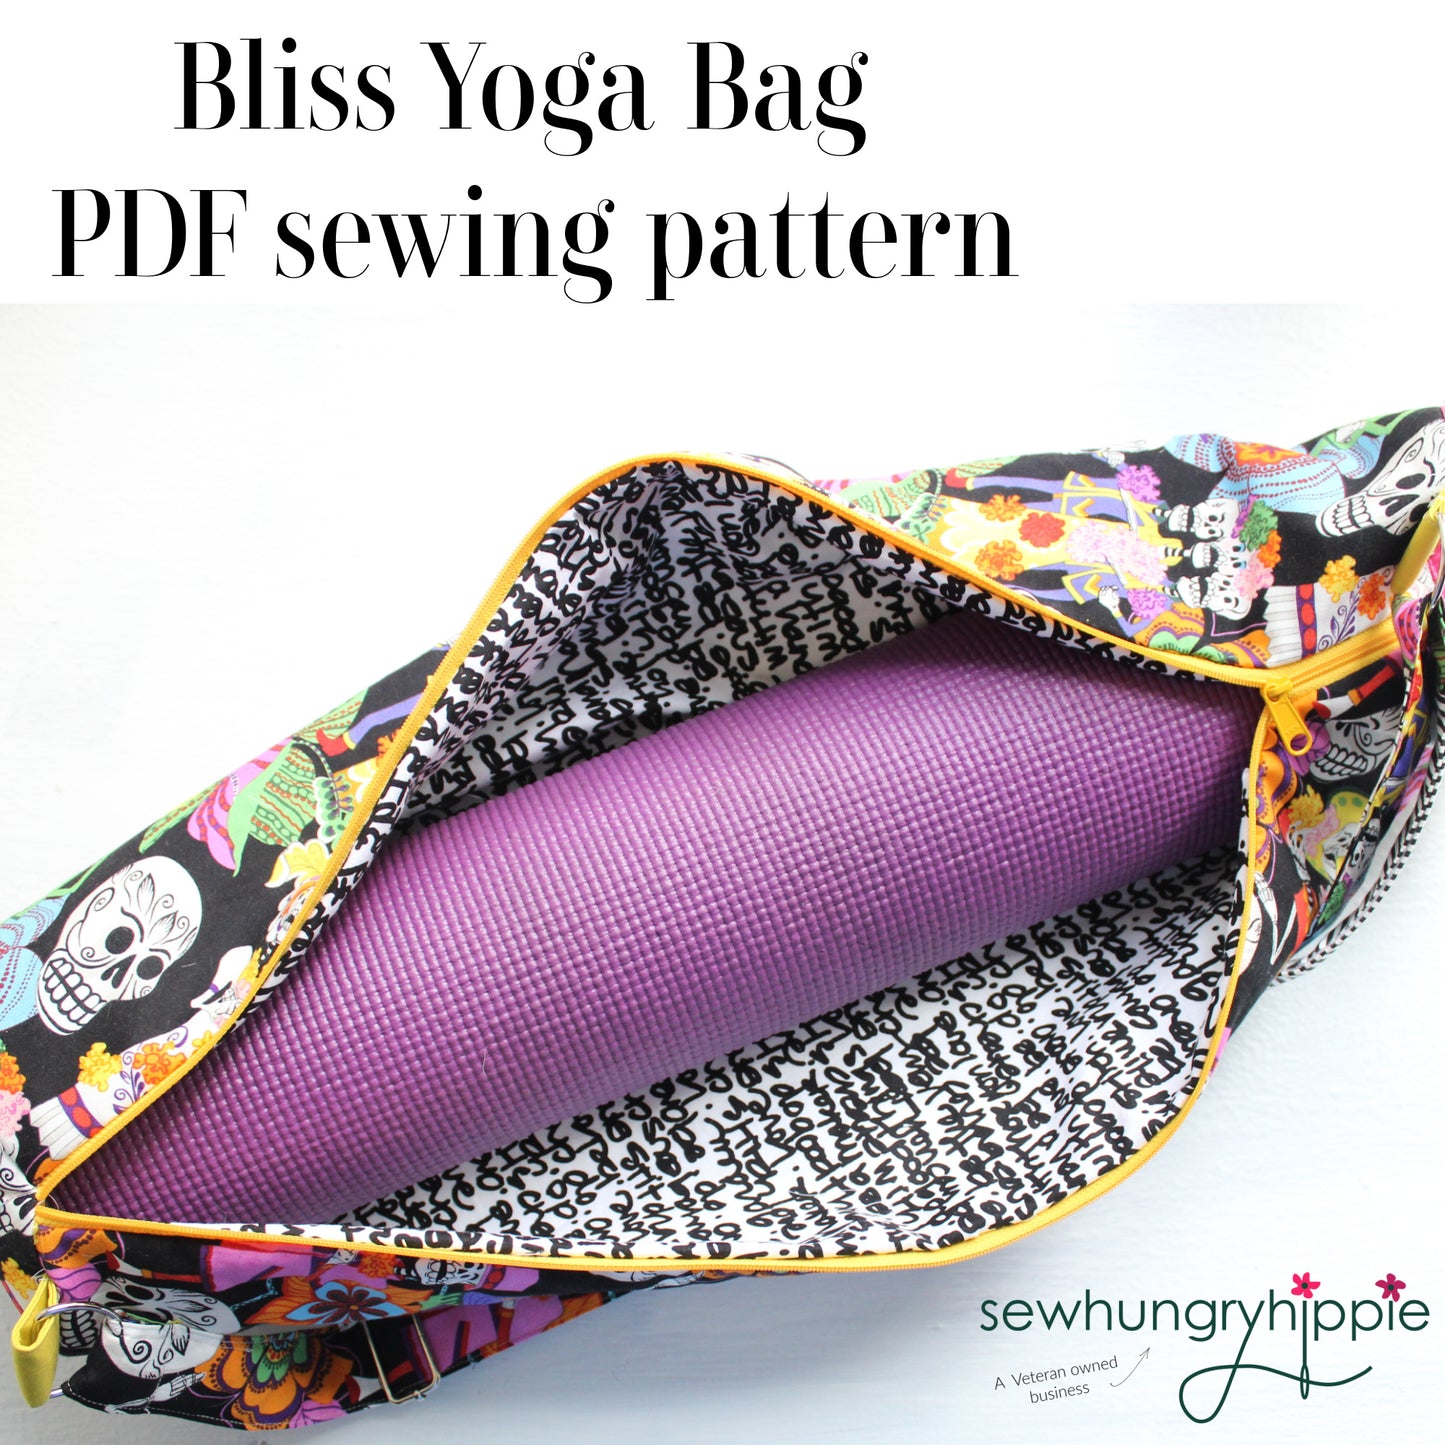 How to Machine Embroider on a Yoga Mat – Needle Work